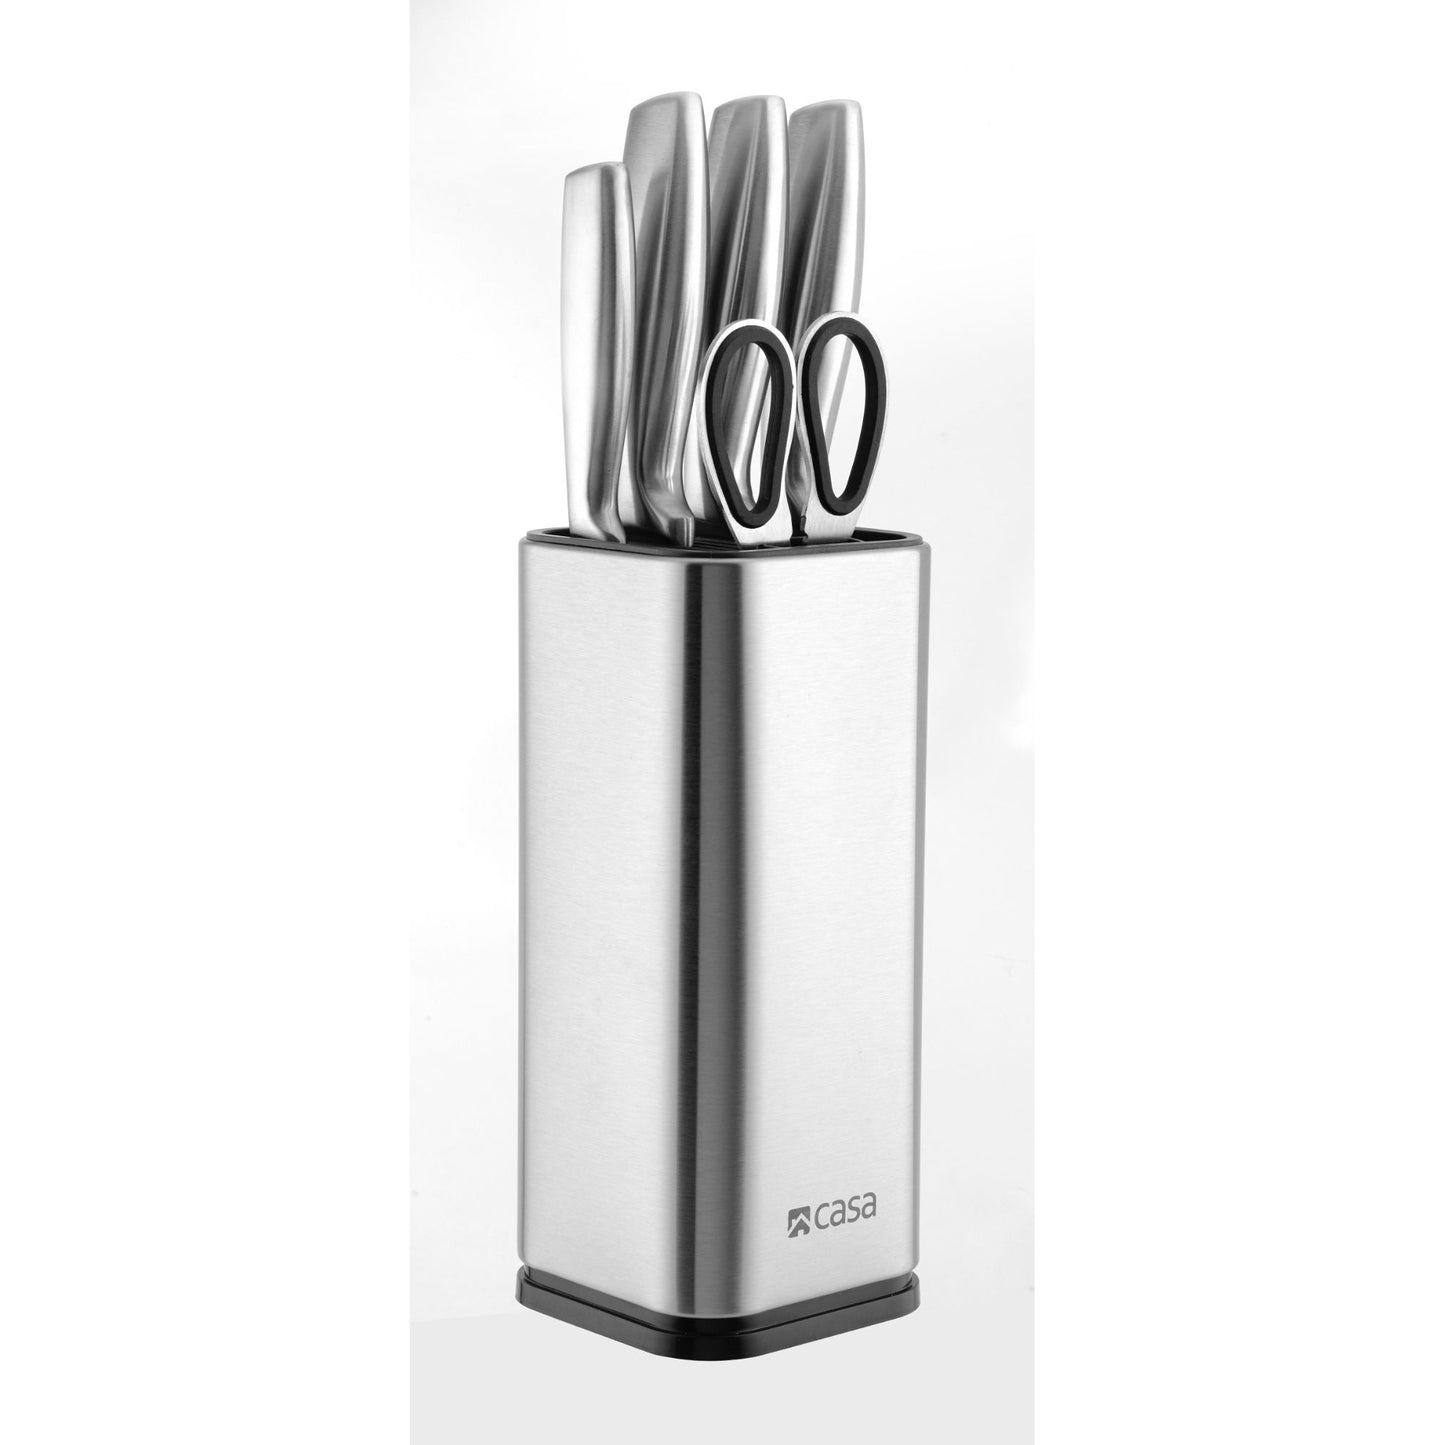 6PC KNIFE SET & BLOCK - STAINLESS STEEL - PALERMO